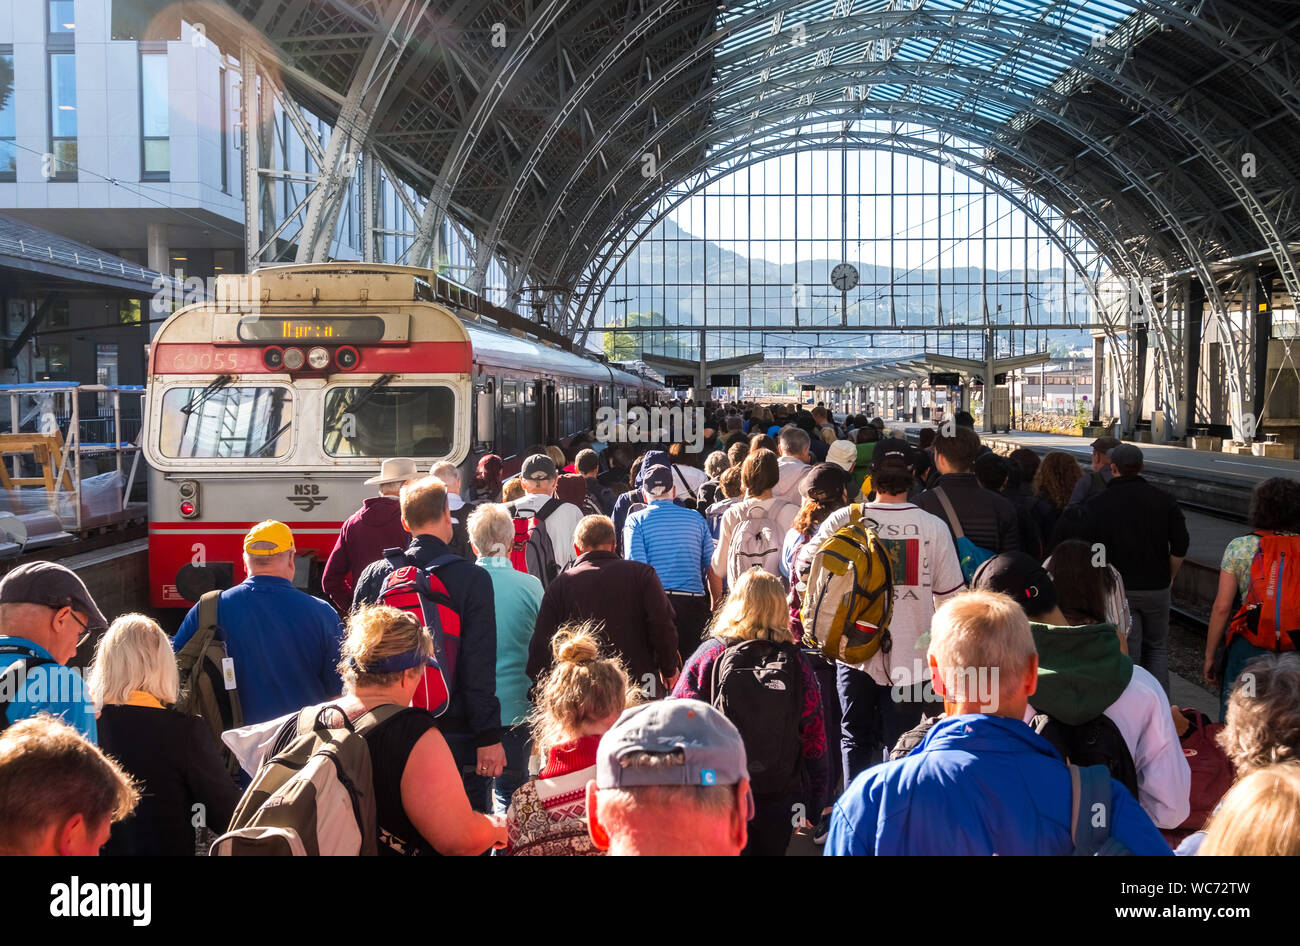 Tourists at the station of Bergen, glass dome roof, train, Bergen, Hordaland, Norway, Scandinavia, Europe, Bergen, NOR, travel, tourism, destination, Stock Photo